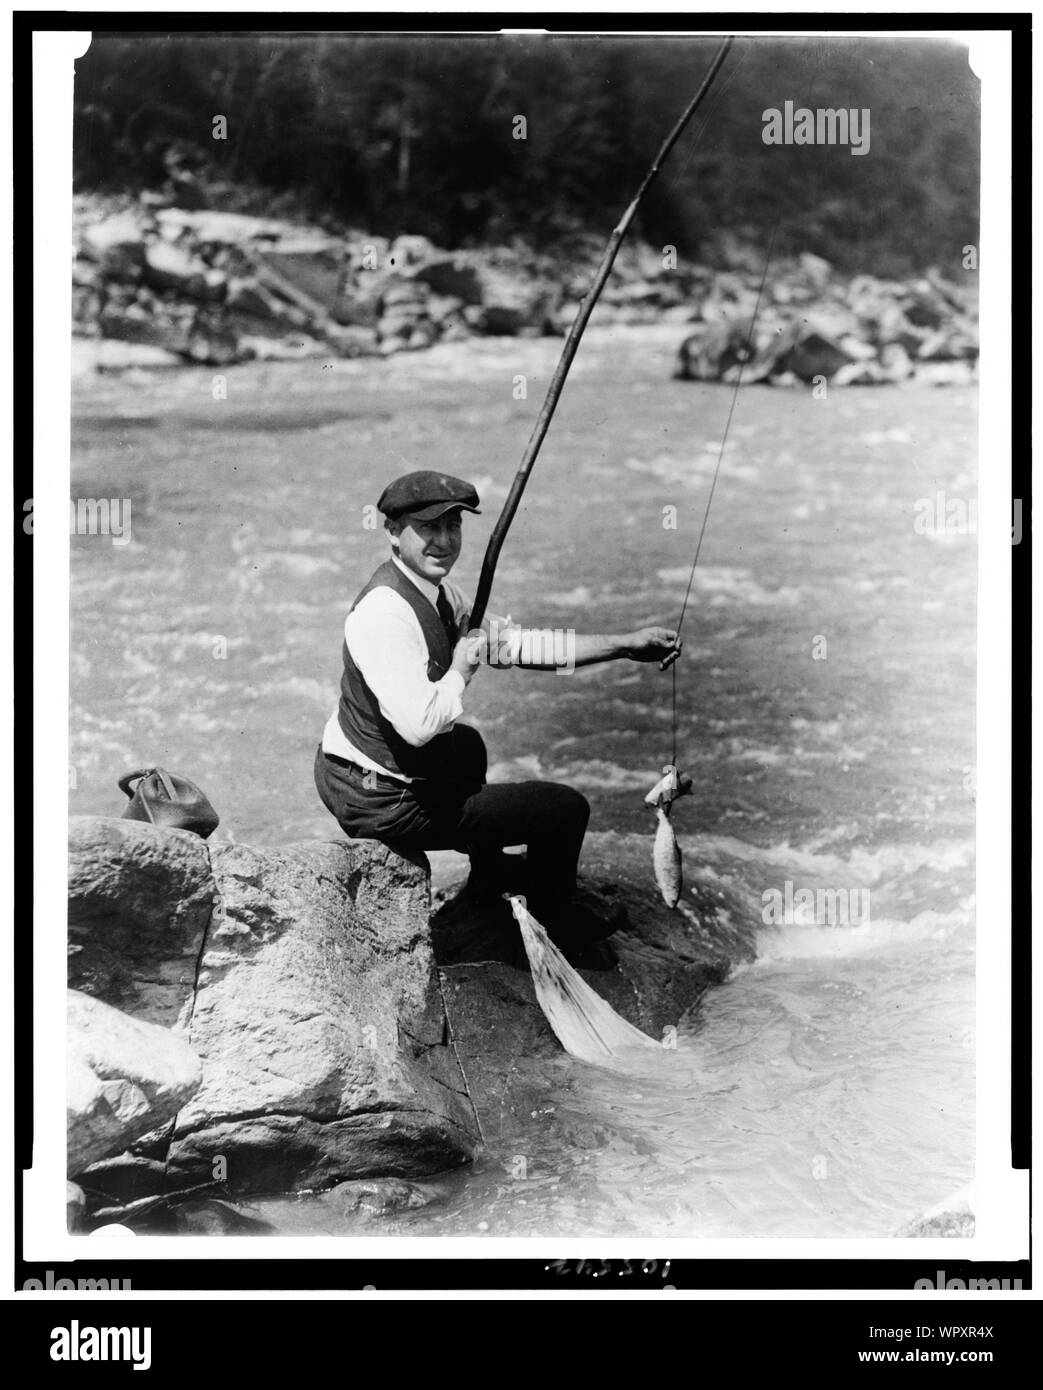 Man seated on rock, with two fish on line, by stream, possibly the River, Washington, D.C. area Stock Photo